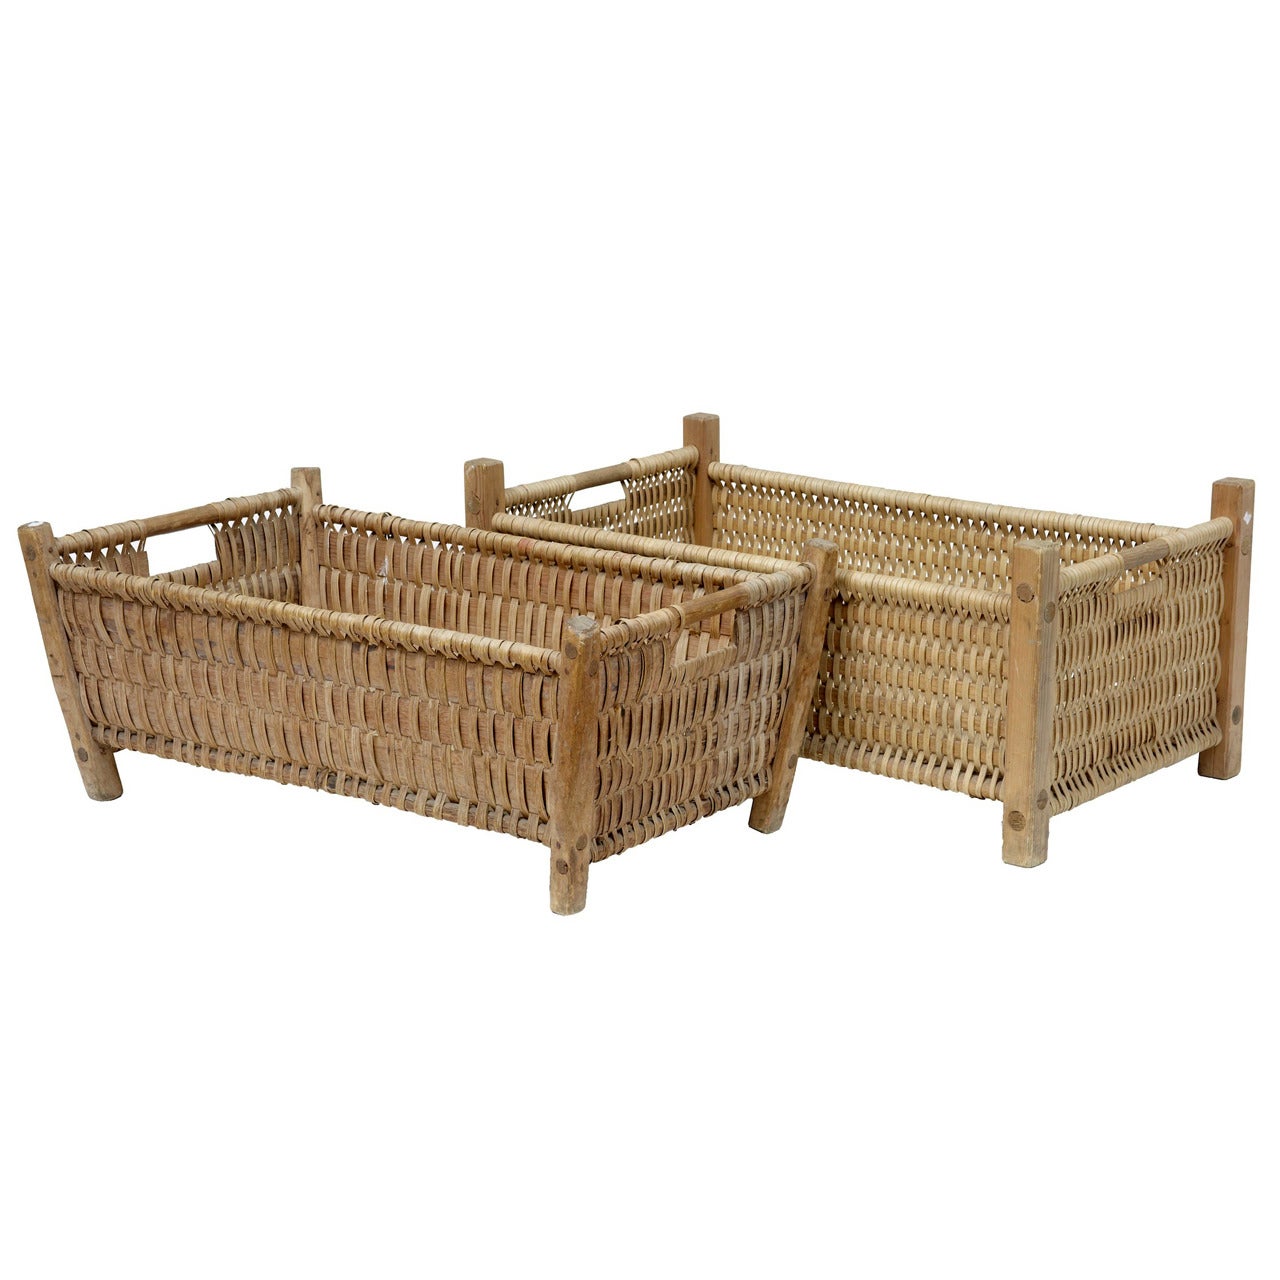 Matched Pair Of Woven Laundry Baskets